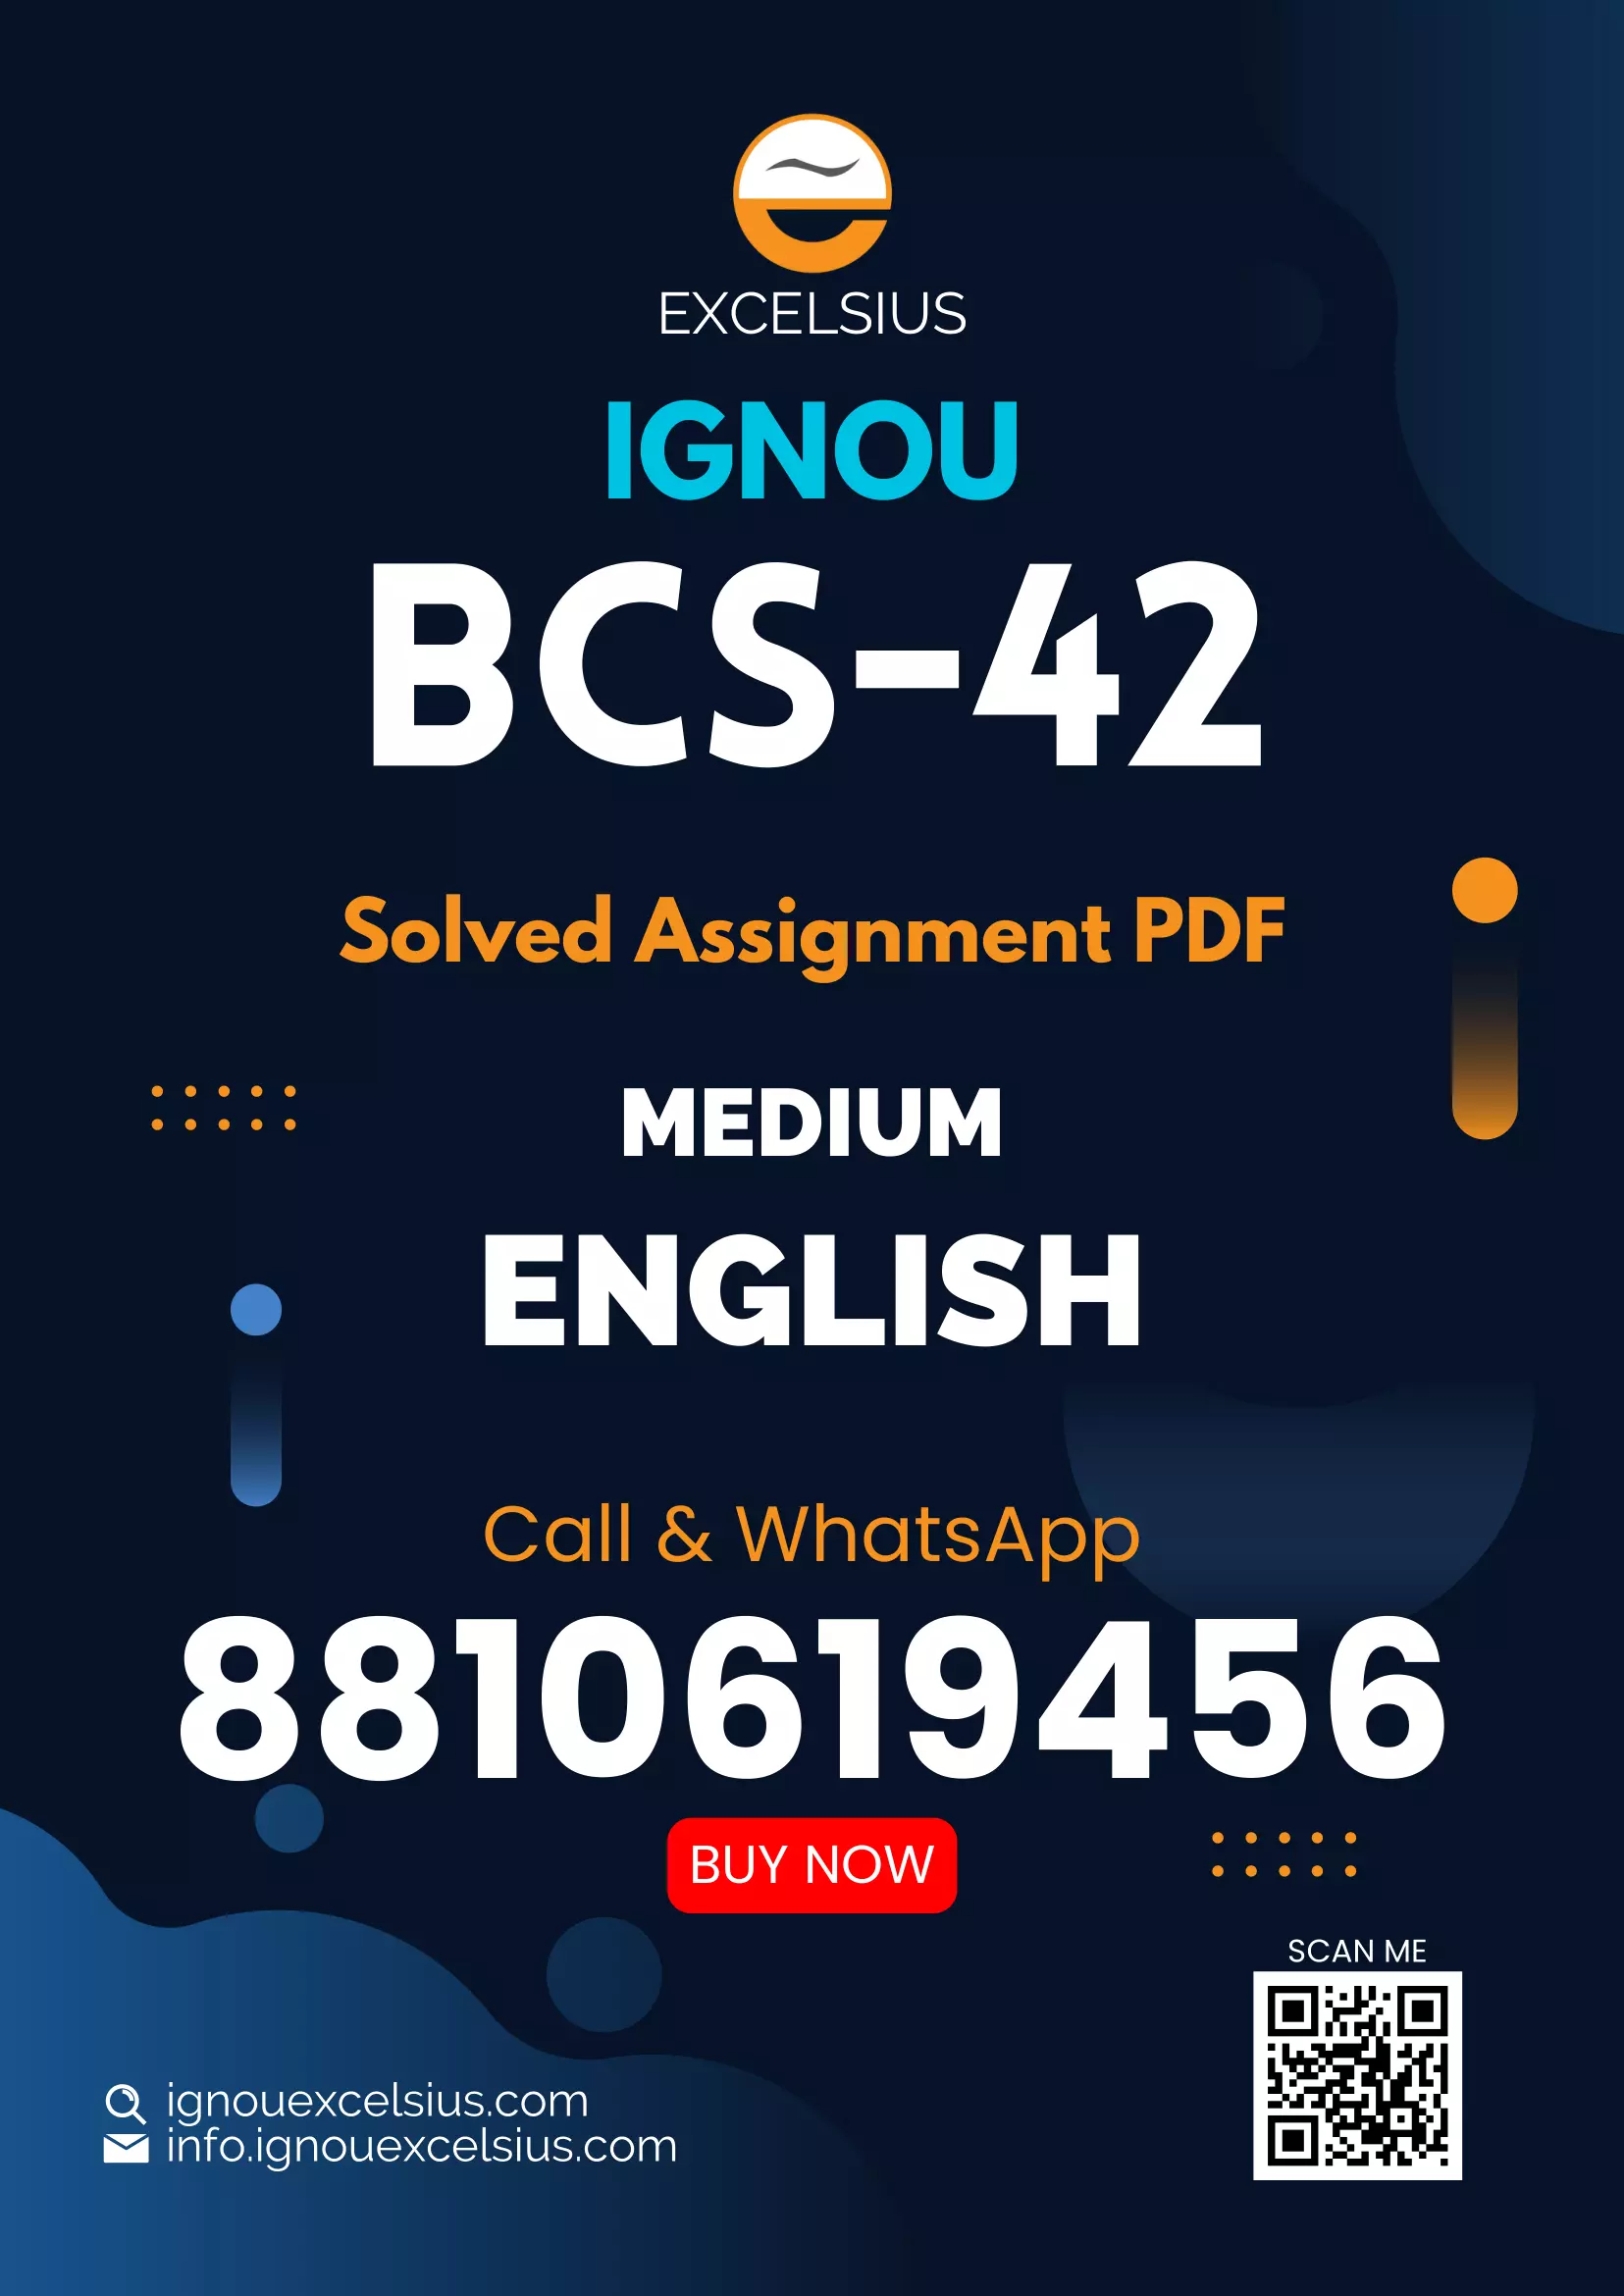 IGNOU BCS-42 - Introduction to Algorithm Design, Latest Solved Assignment-July 2023 - January 2024